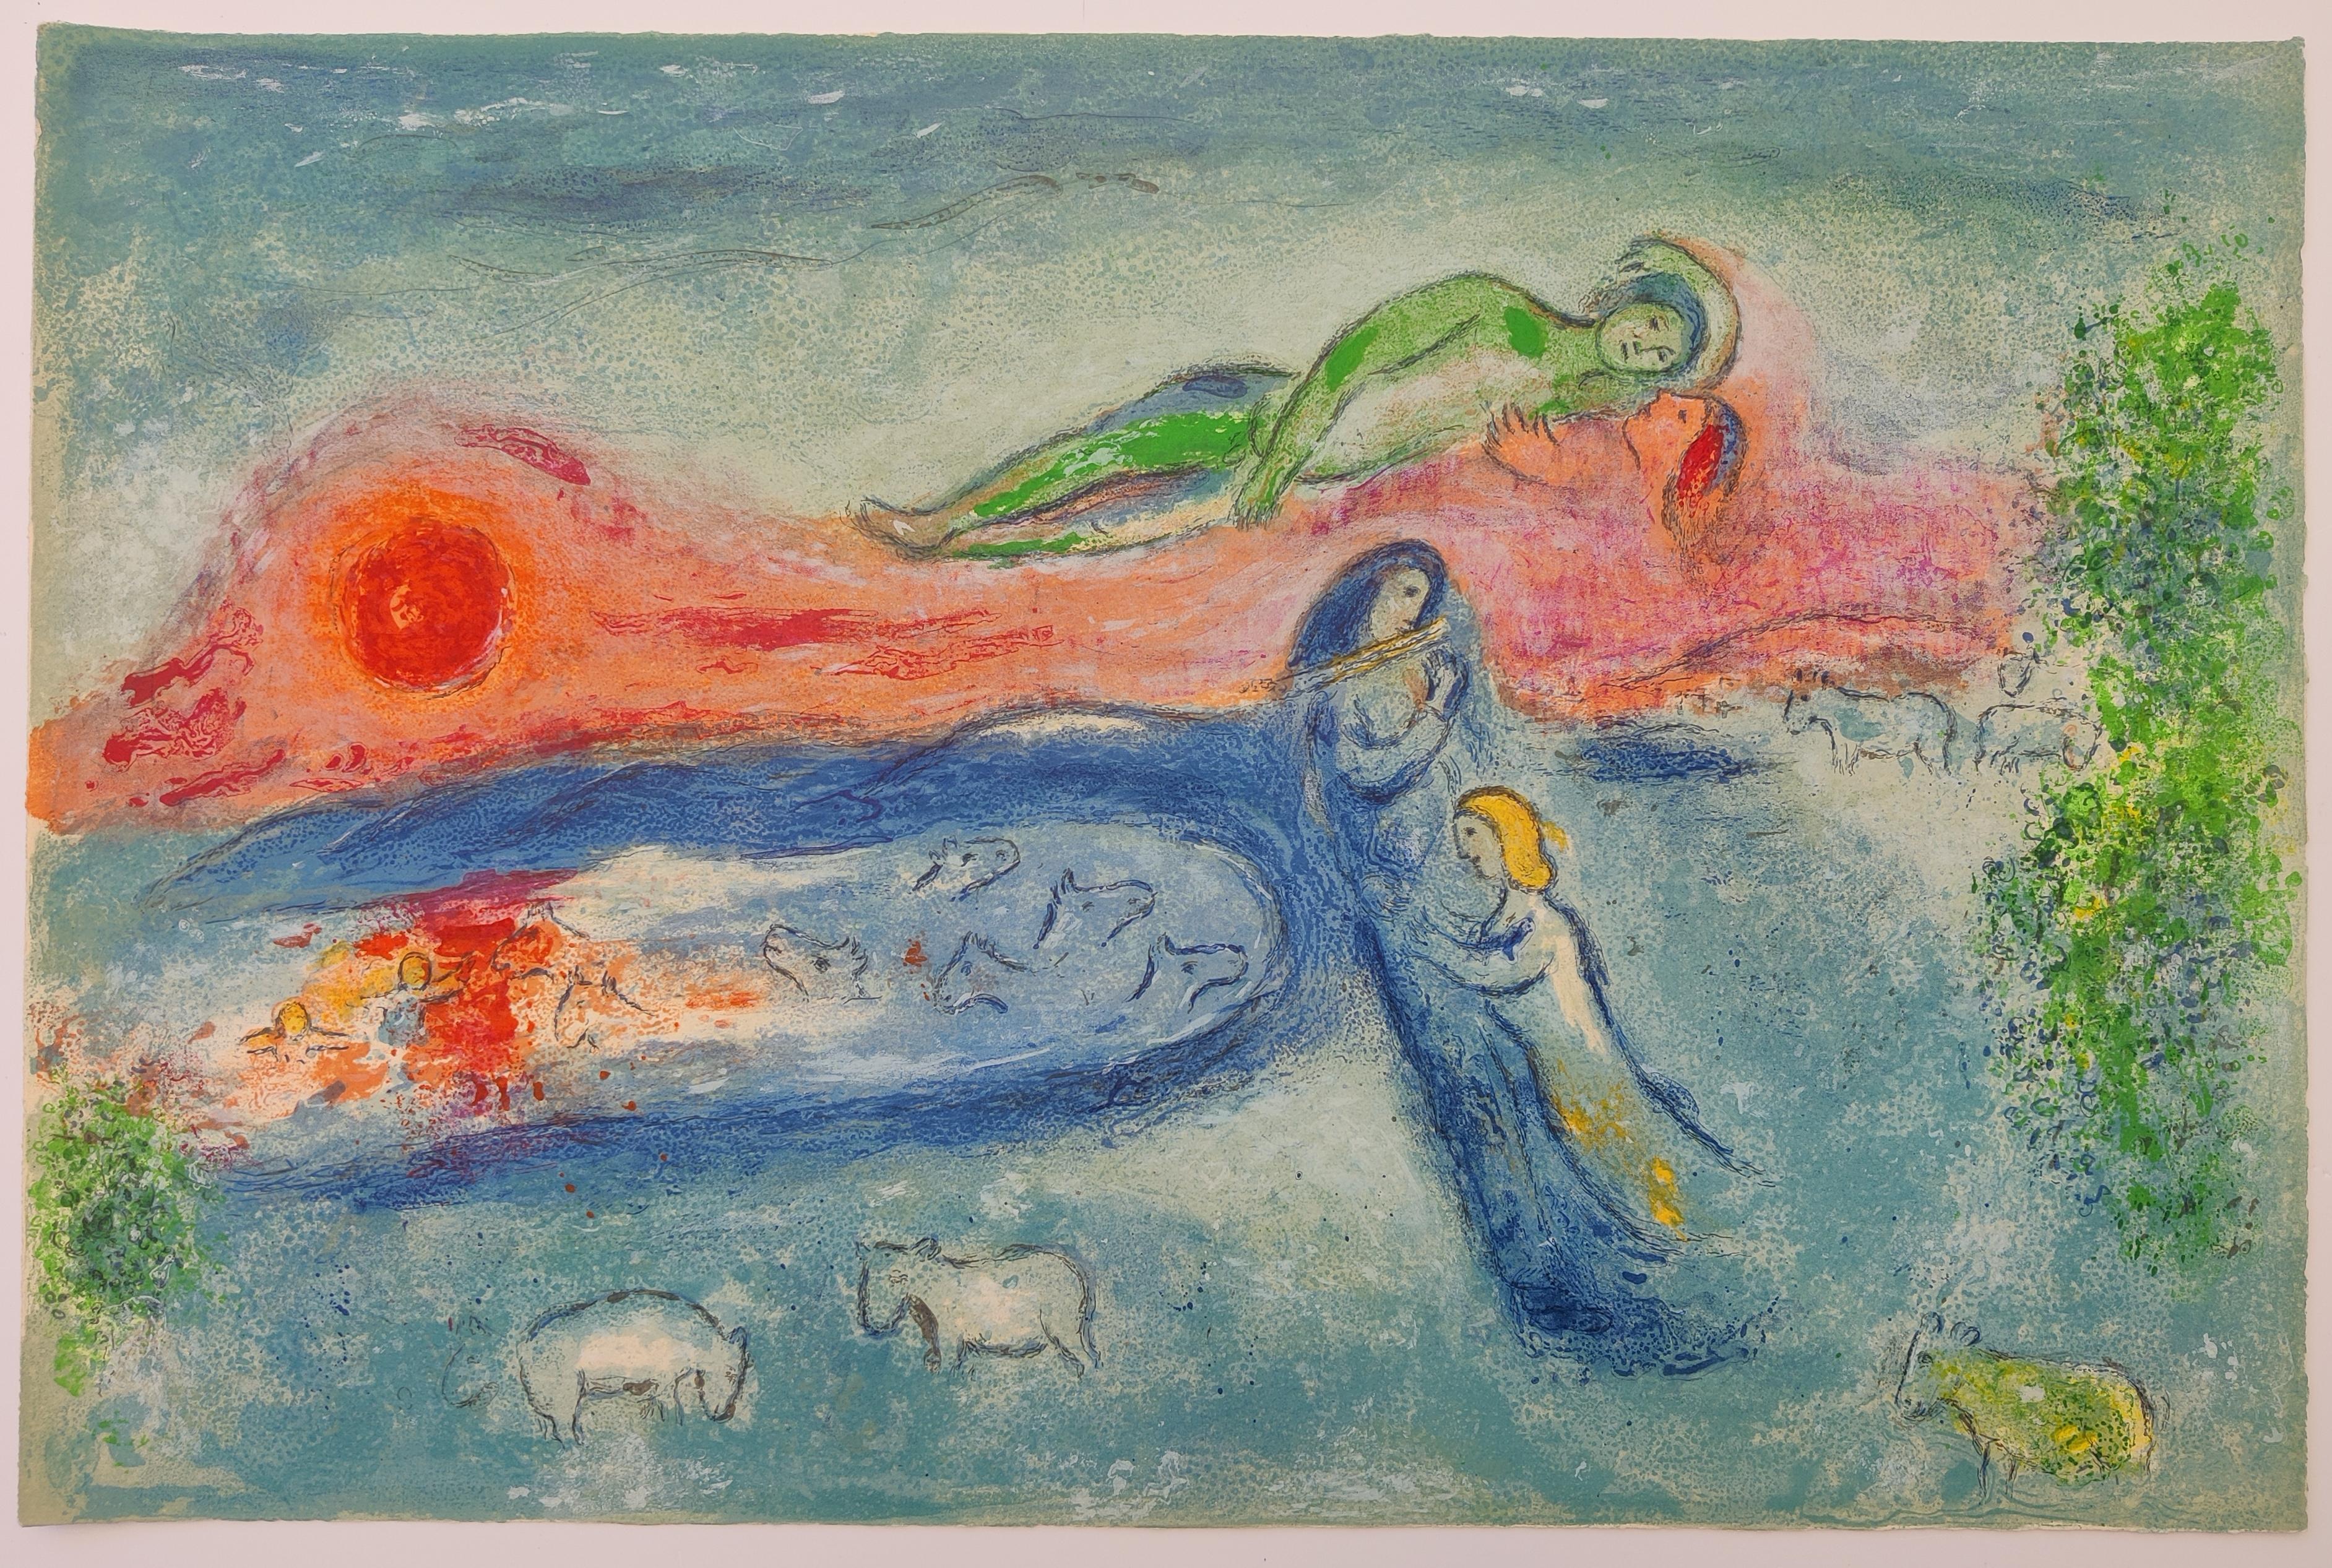 Marc Chagall
The Death of Dorcon, from Chagall's Daphnis and Chloé suite,  1961
Sheet size: 42 x 64 cm
Unsigned
From the book edition of 250 (there is also a signed and numbered edition of 60), on Arches wove paper
Printed by Mourlot,